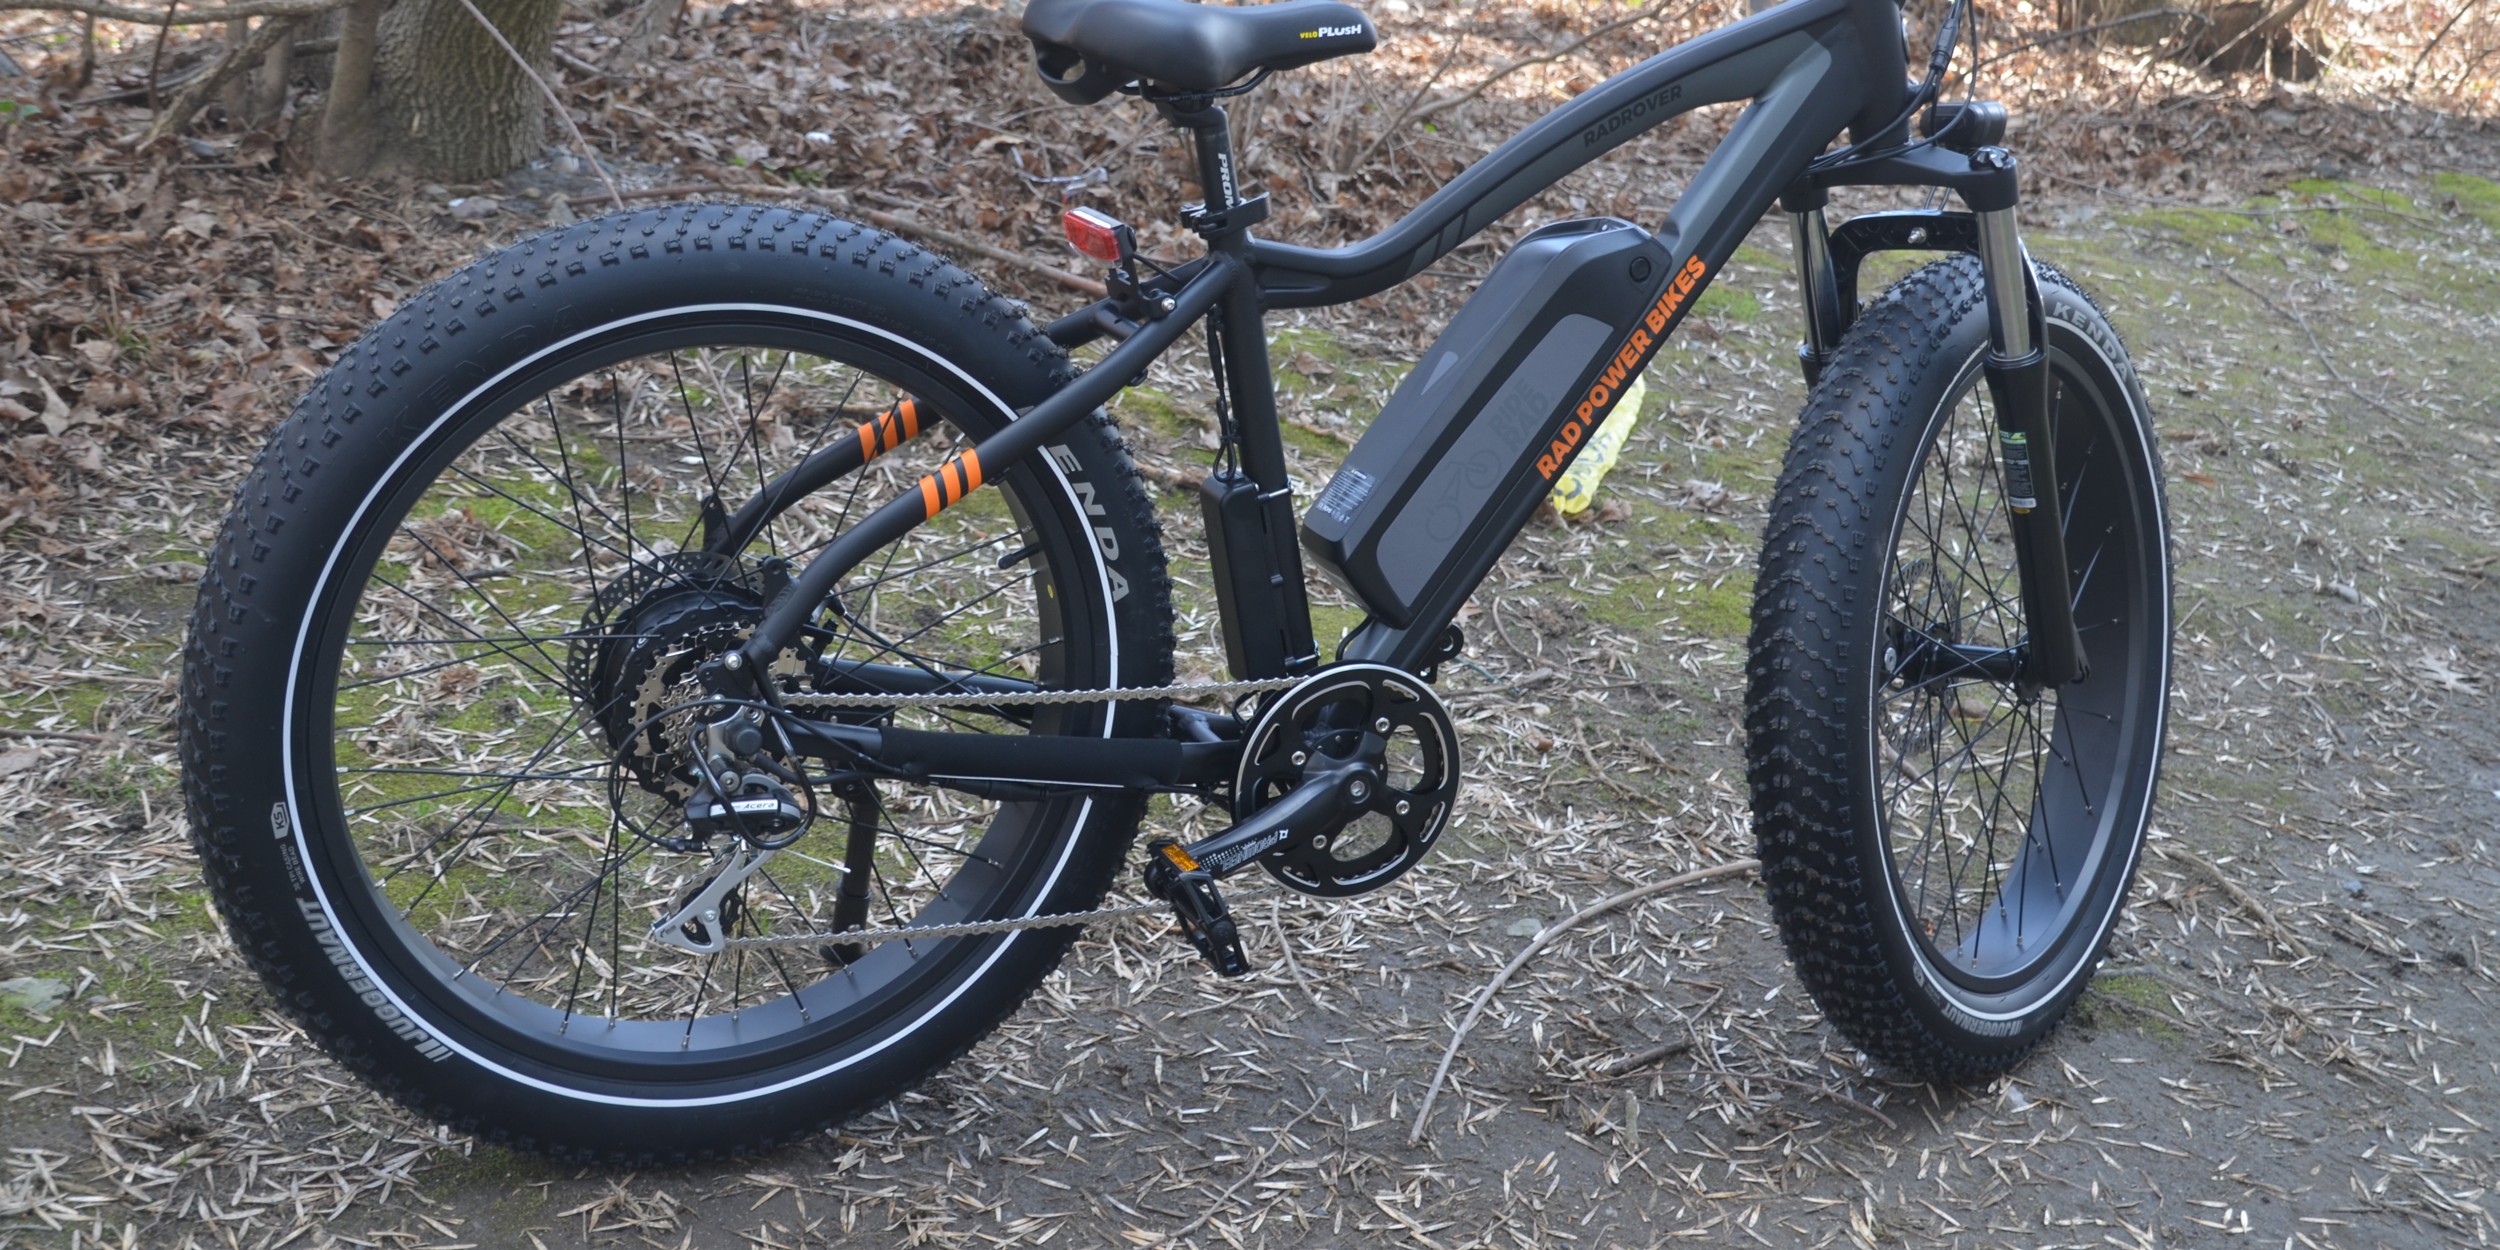 RadRover fat tire electric bicycle - The complete review